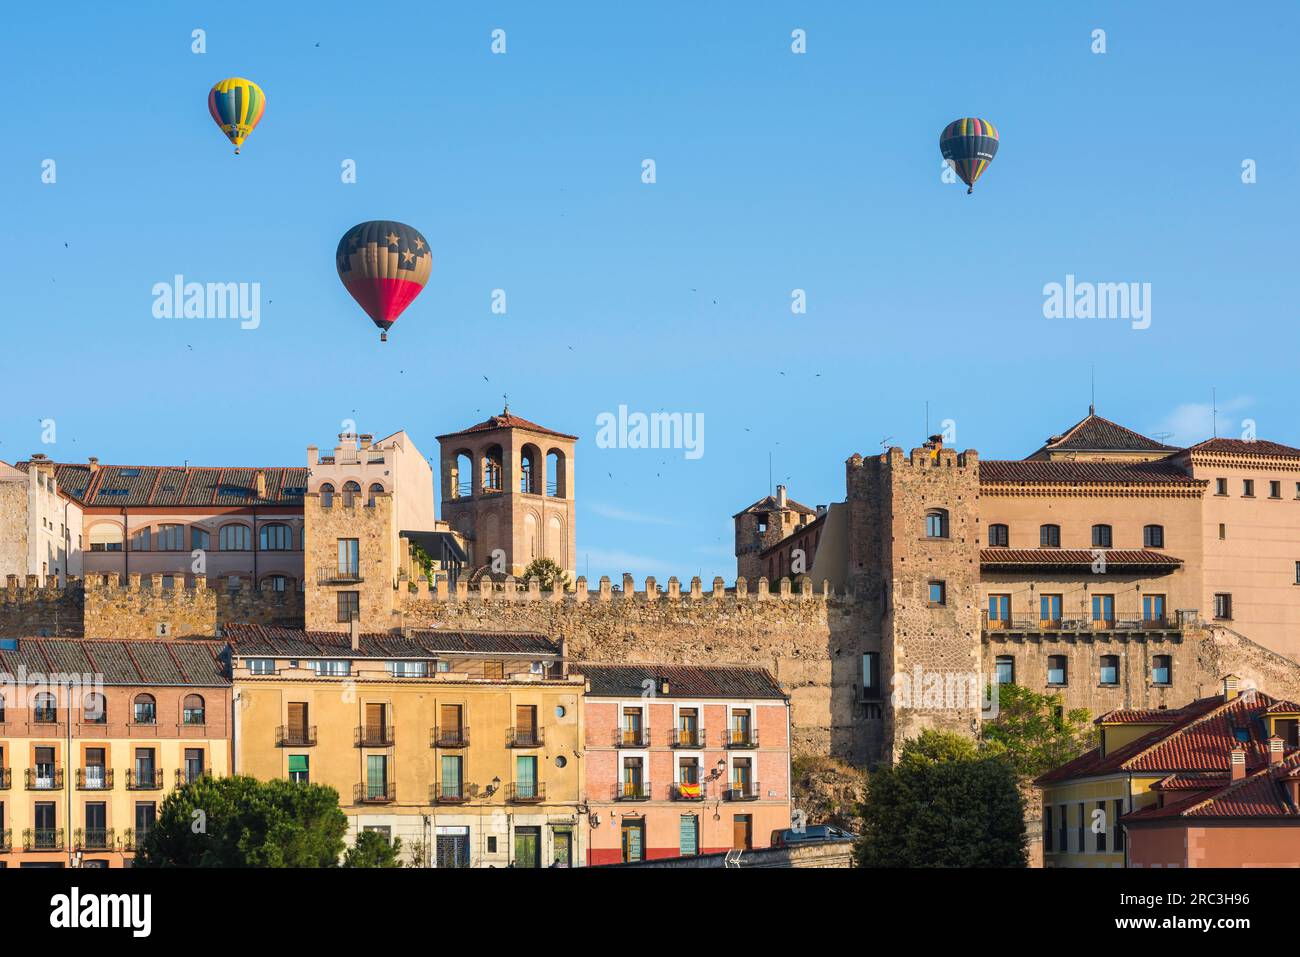 Adventure travel, view in summer of hot air balloons floating over the historic Old Town quarter of the city of Segovia, central Spain Stock Photo